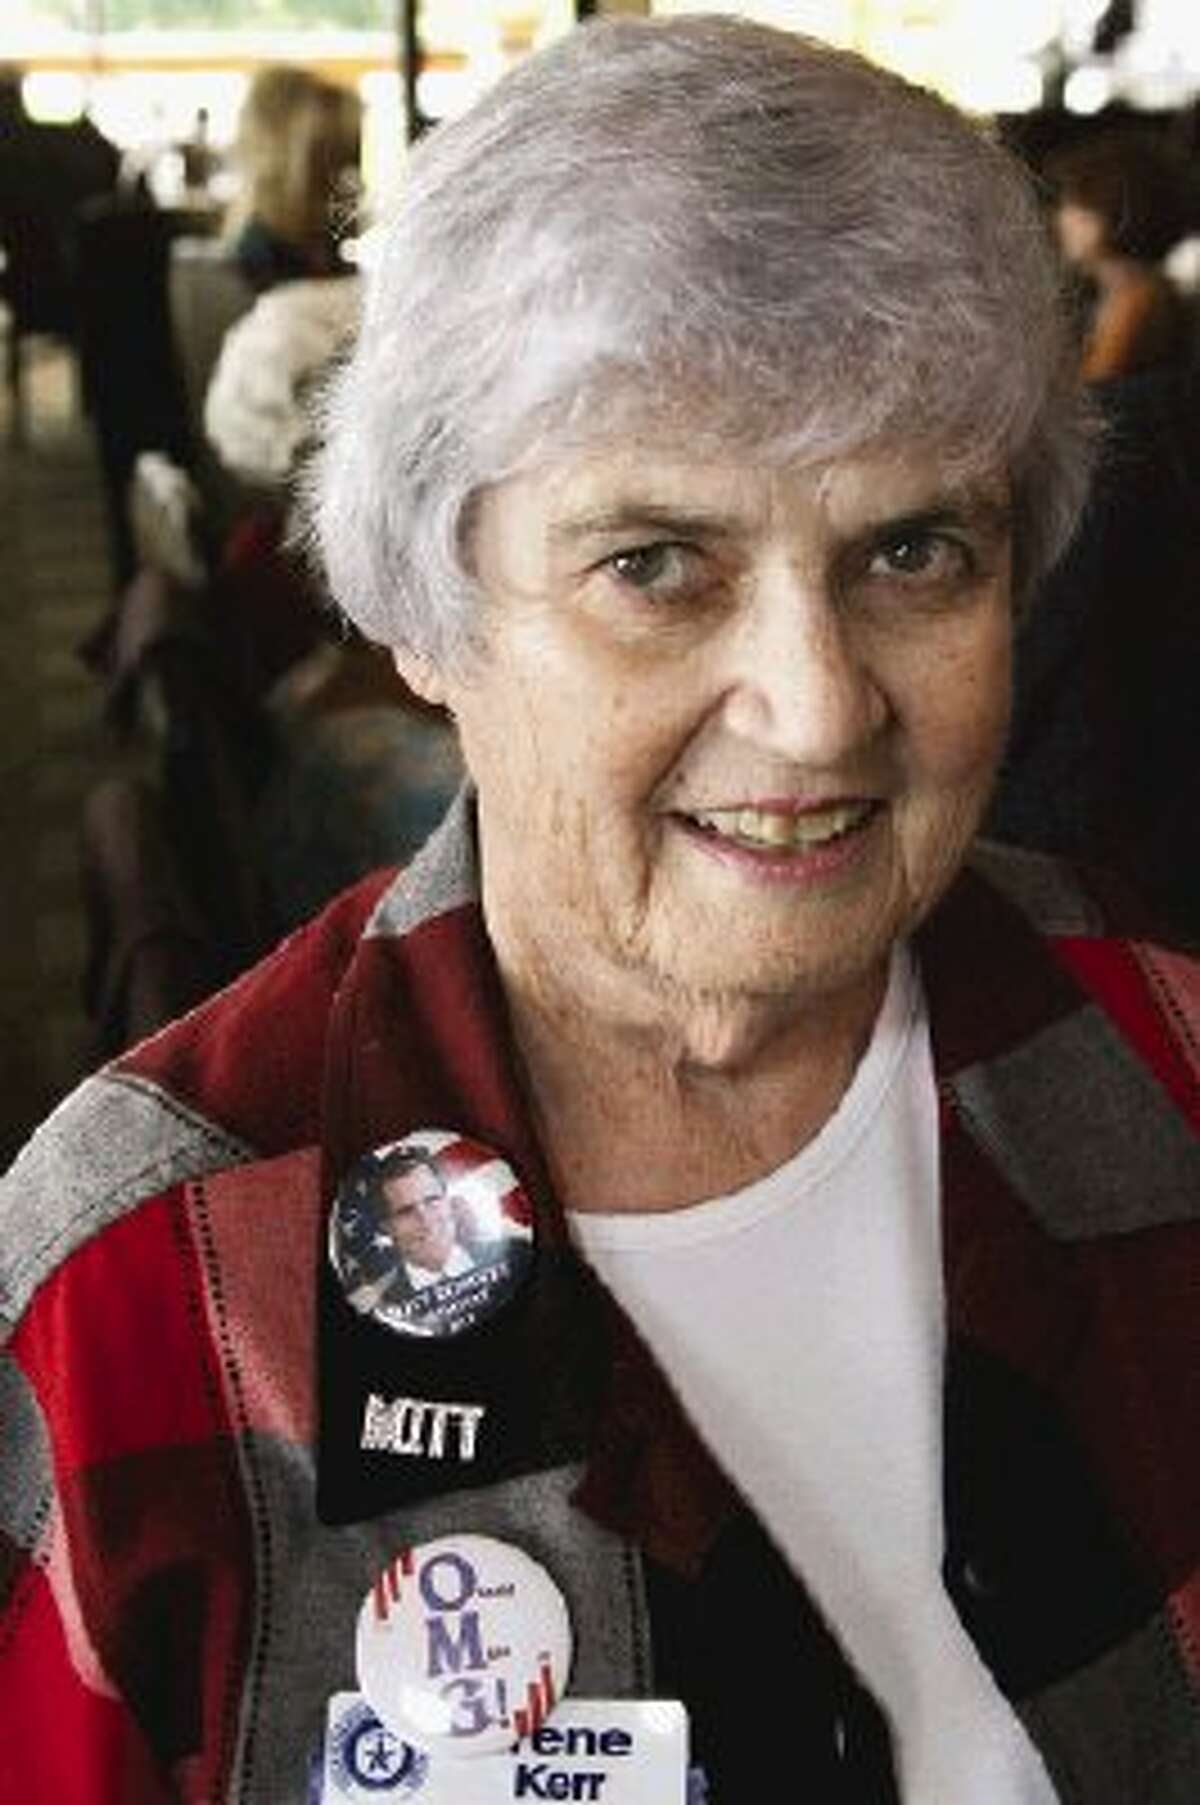 Irene Kerr, deputy president of the Texas Federation of Republican Women, shows off her campaign buttons and election jewelry in support of presidential candidate Mitt Romney.